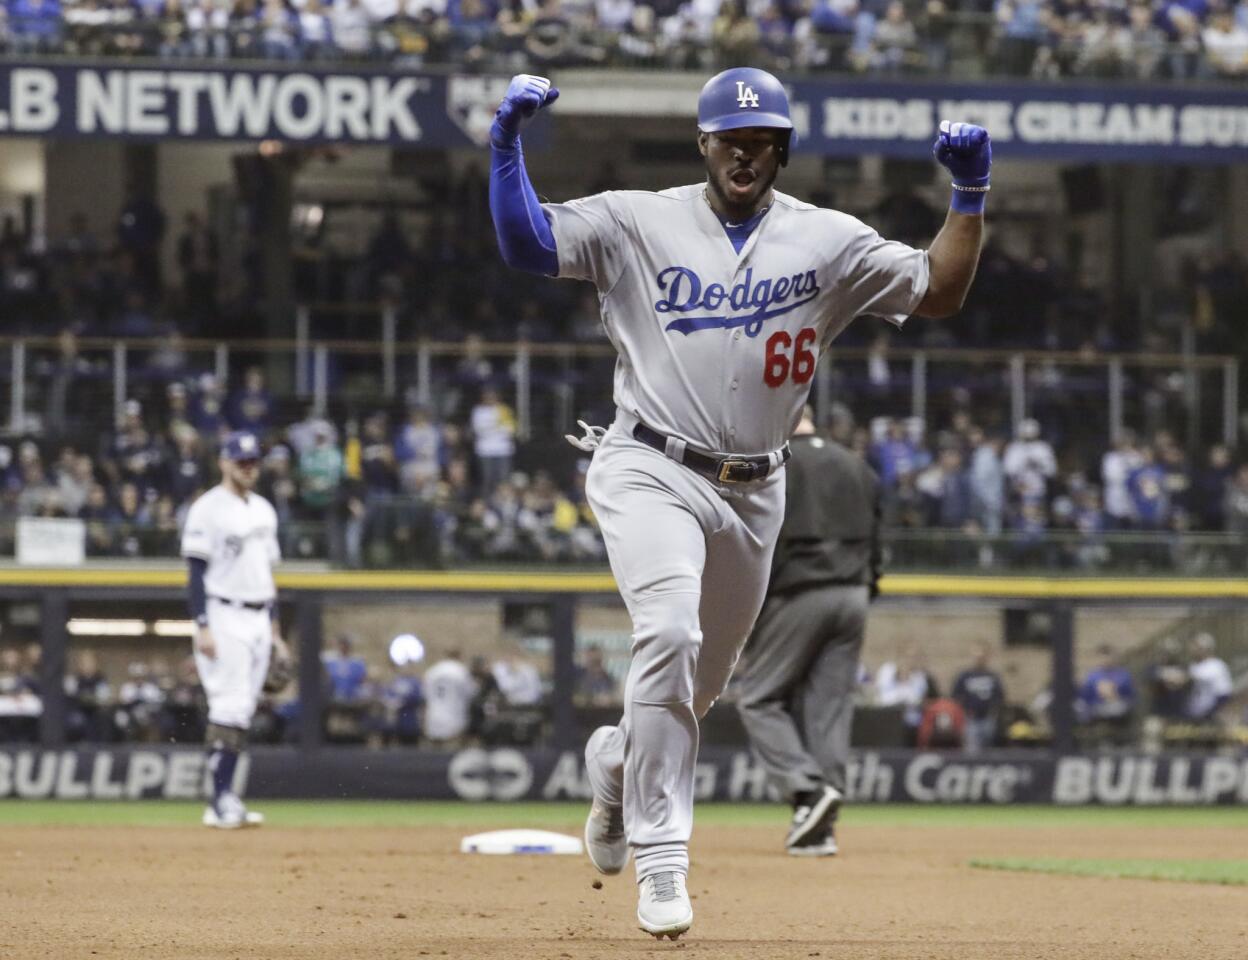 Dodgers Yasiel Puig celebrates after hitting a three run homerun in the 6th inning.